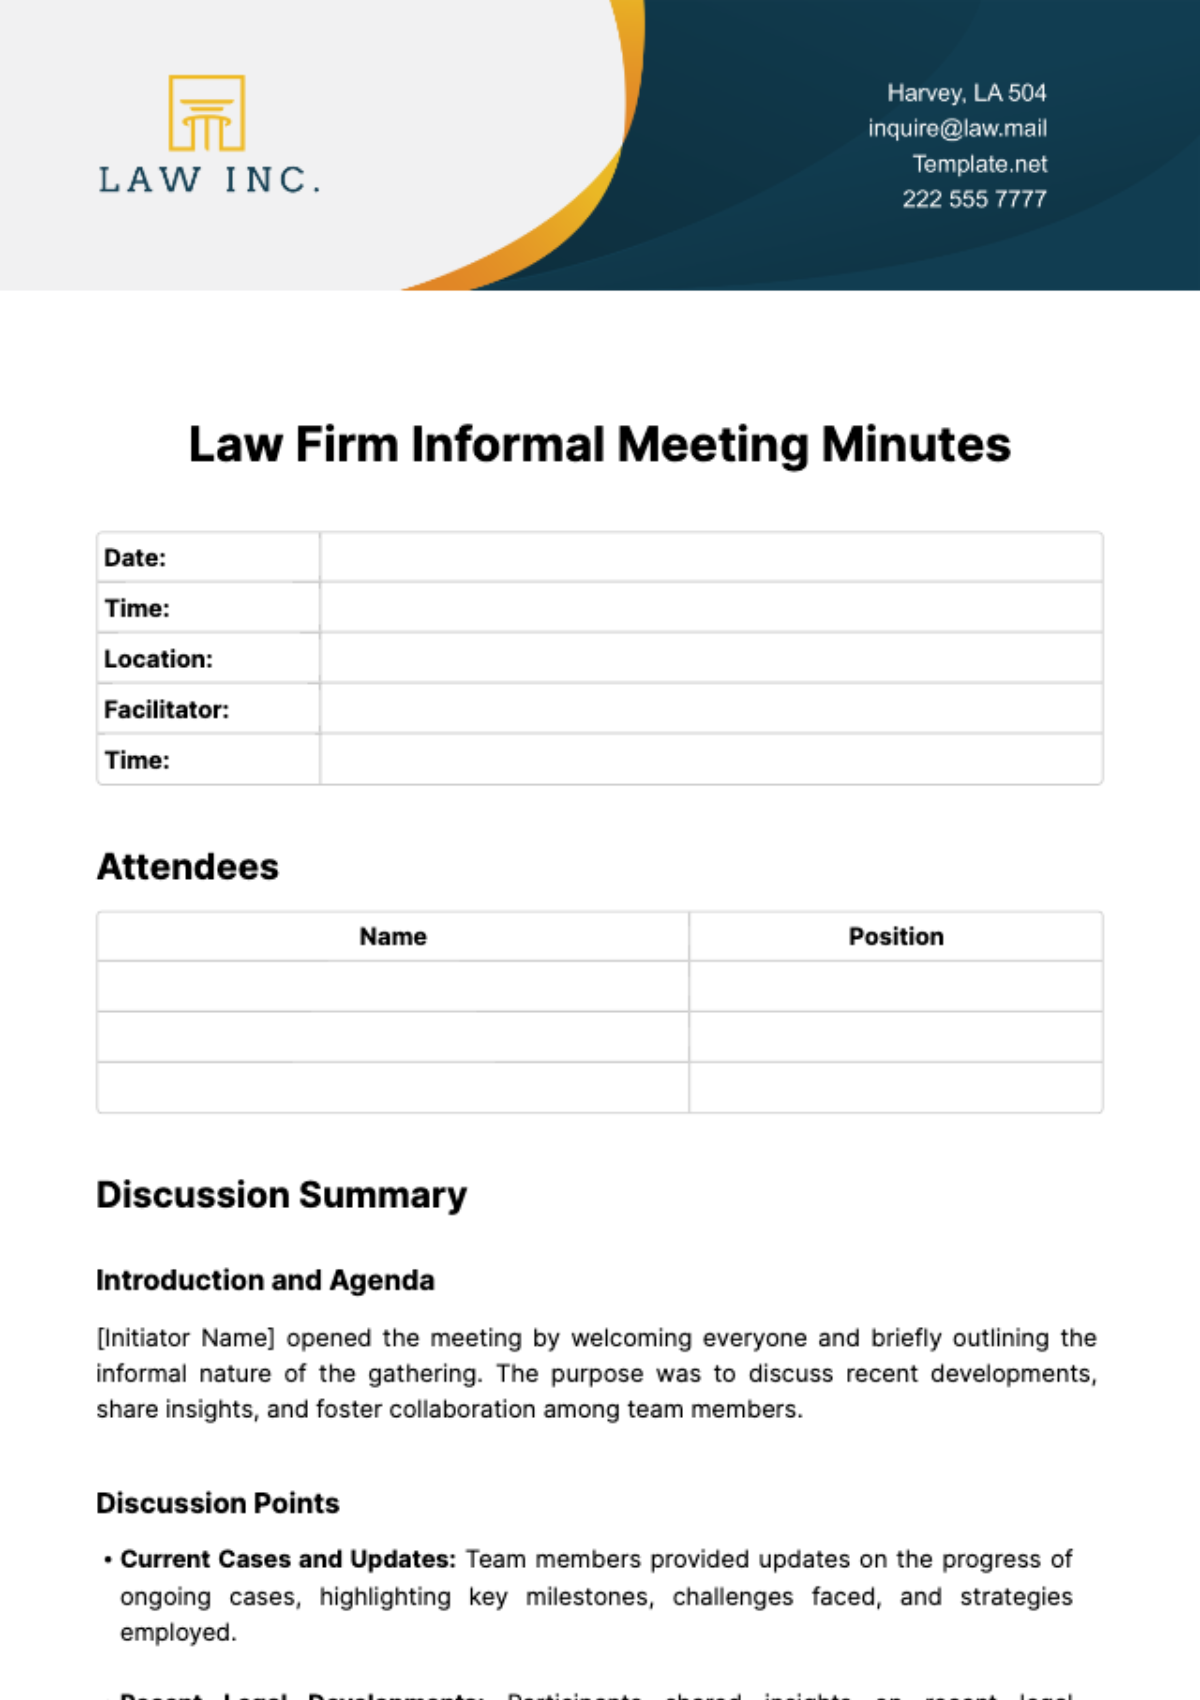 Law Firm Informal Meeting Minutes Template